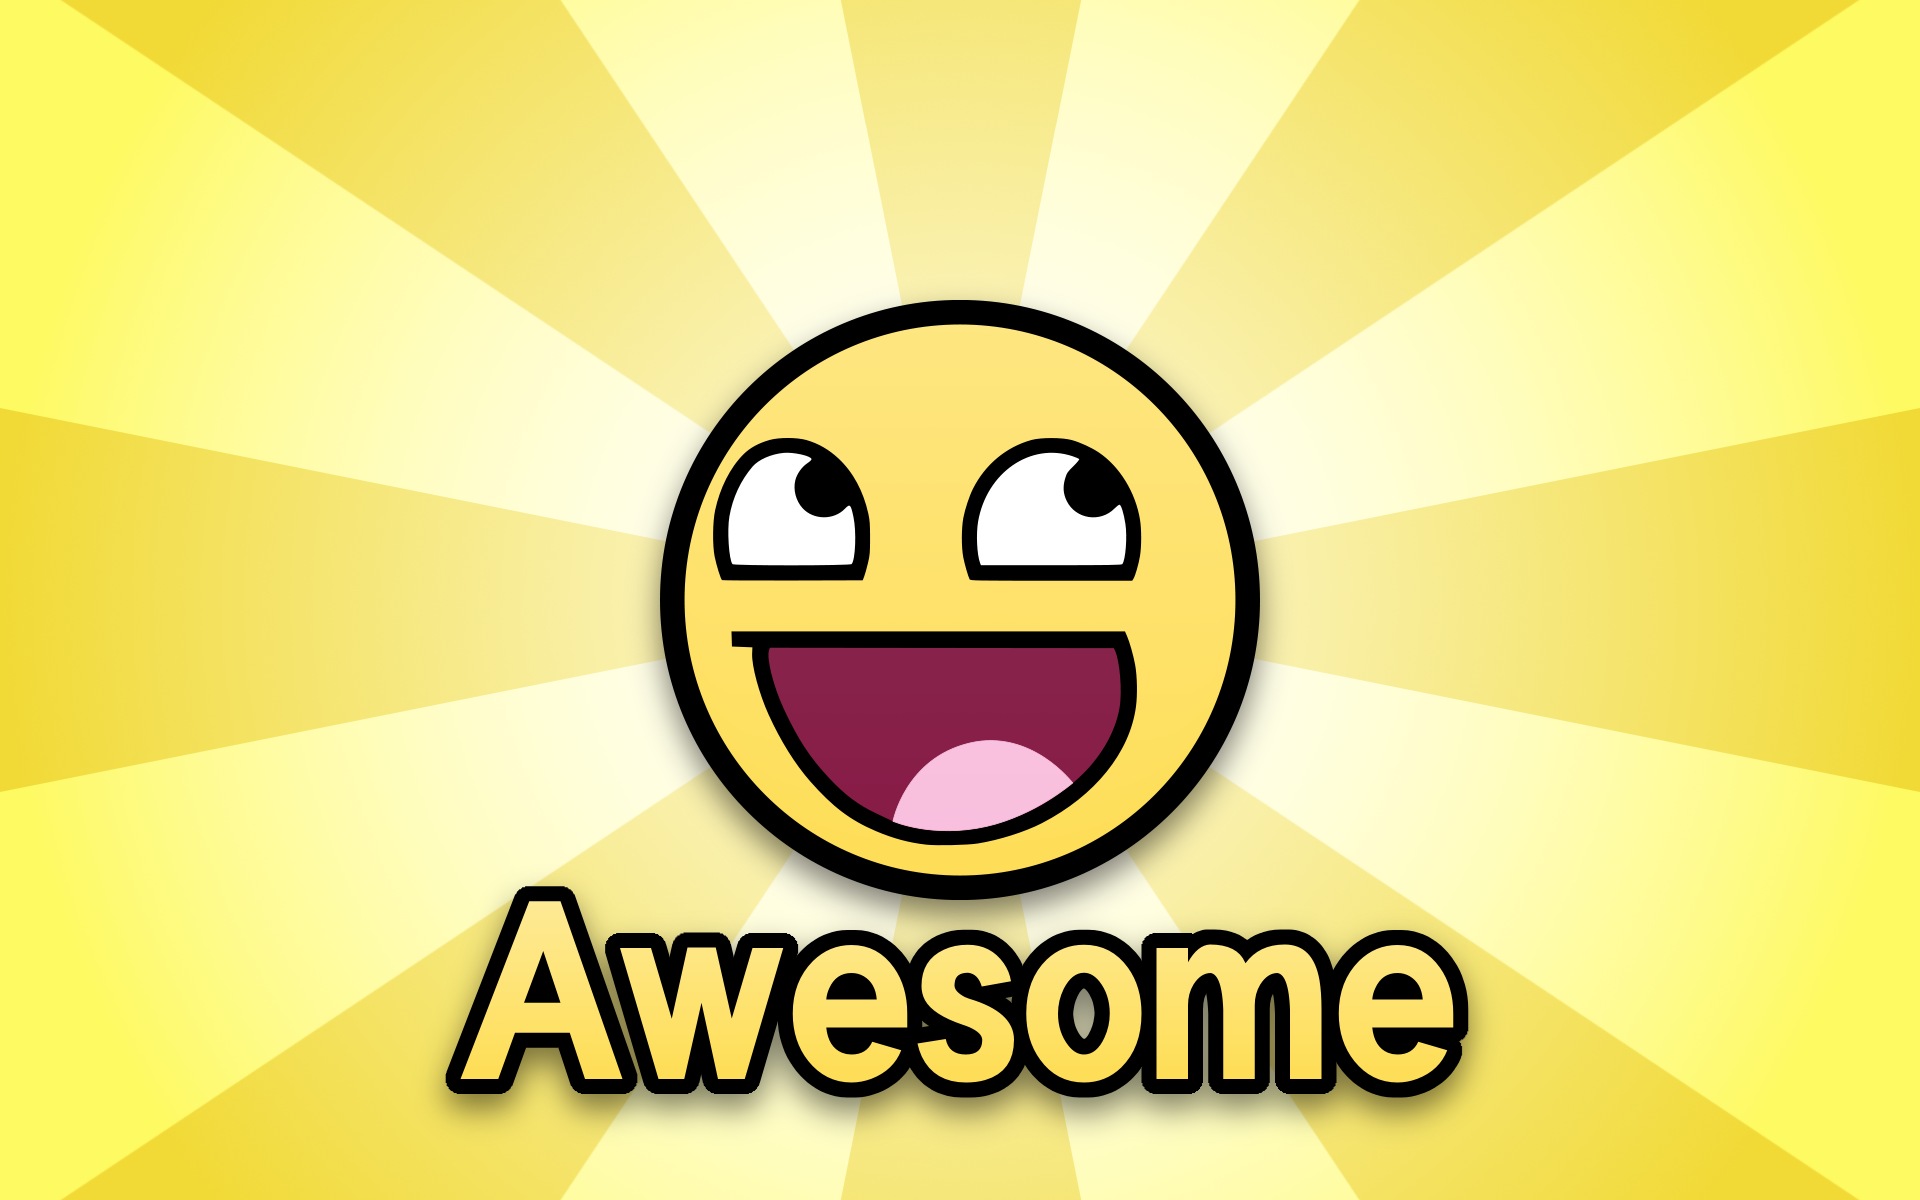 AWESOME FACE - awesome face Wallpaper (29339096) - Fanpop